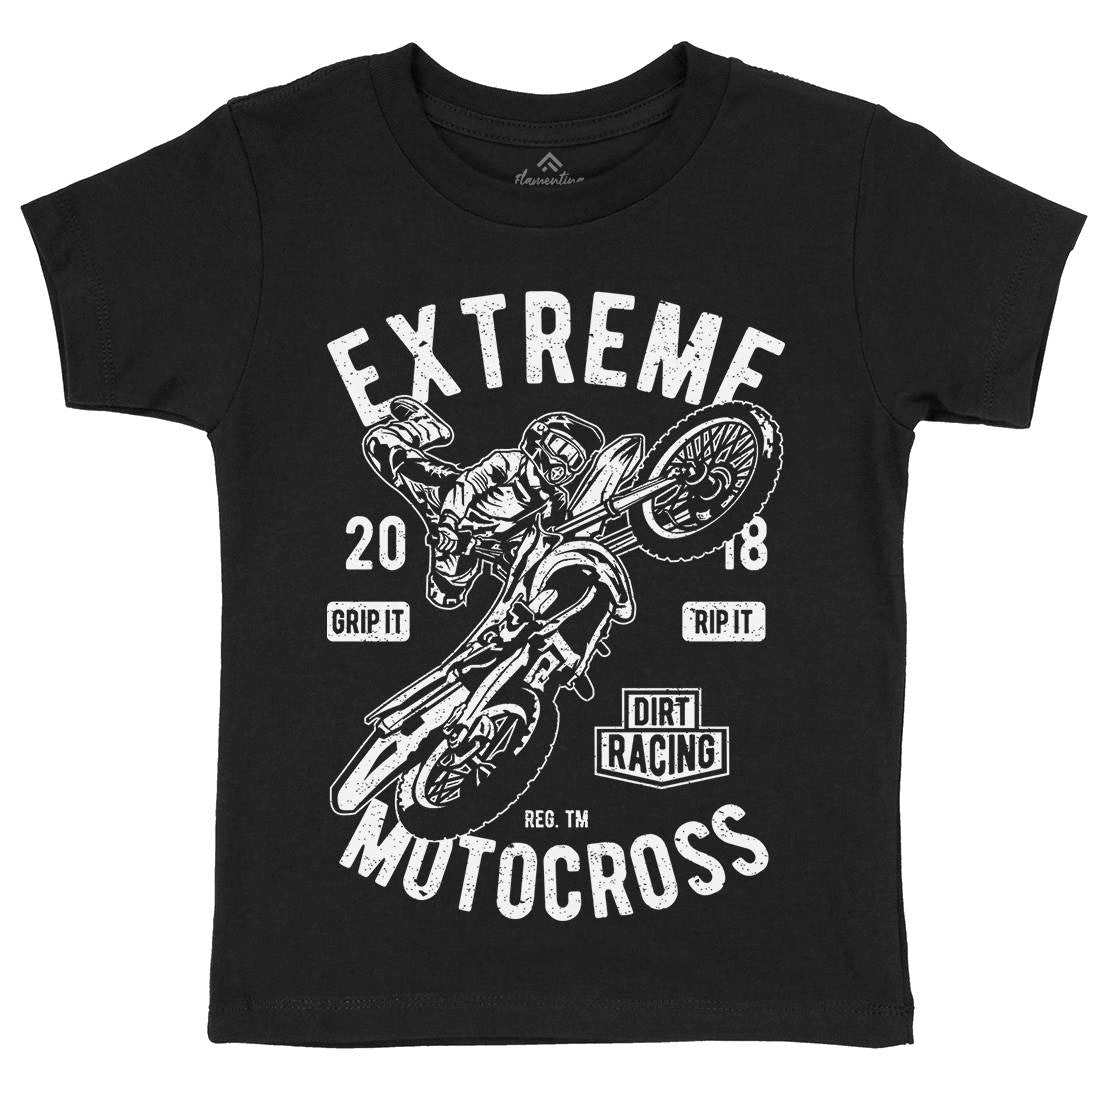 Extreme Motocross Kids Crew Neck T-Shirt Motorcycles A651